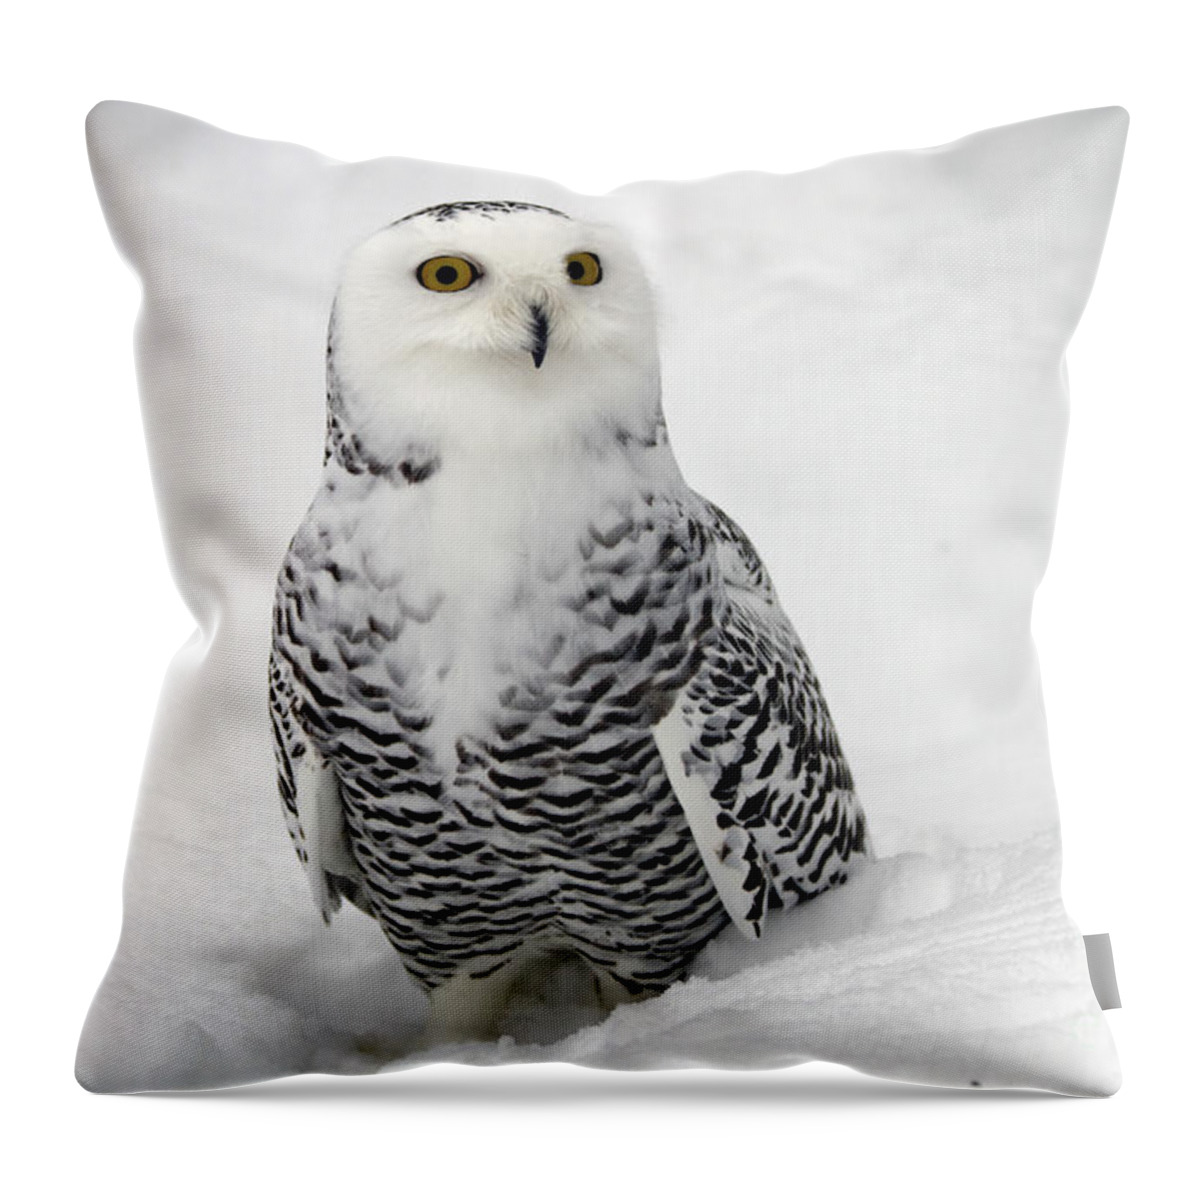 Snowy Owl Throw Pillow featuring the photograph Snowy Owl Bubo scandiacus by Lilach Weiss